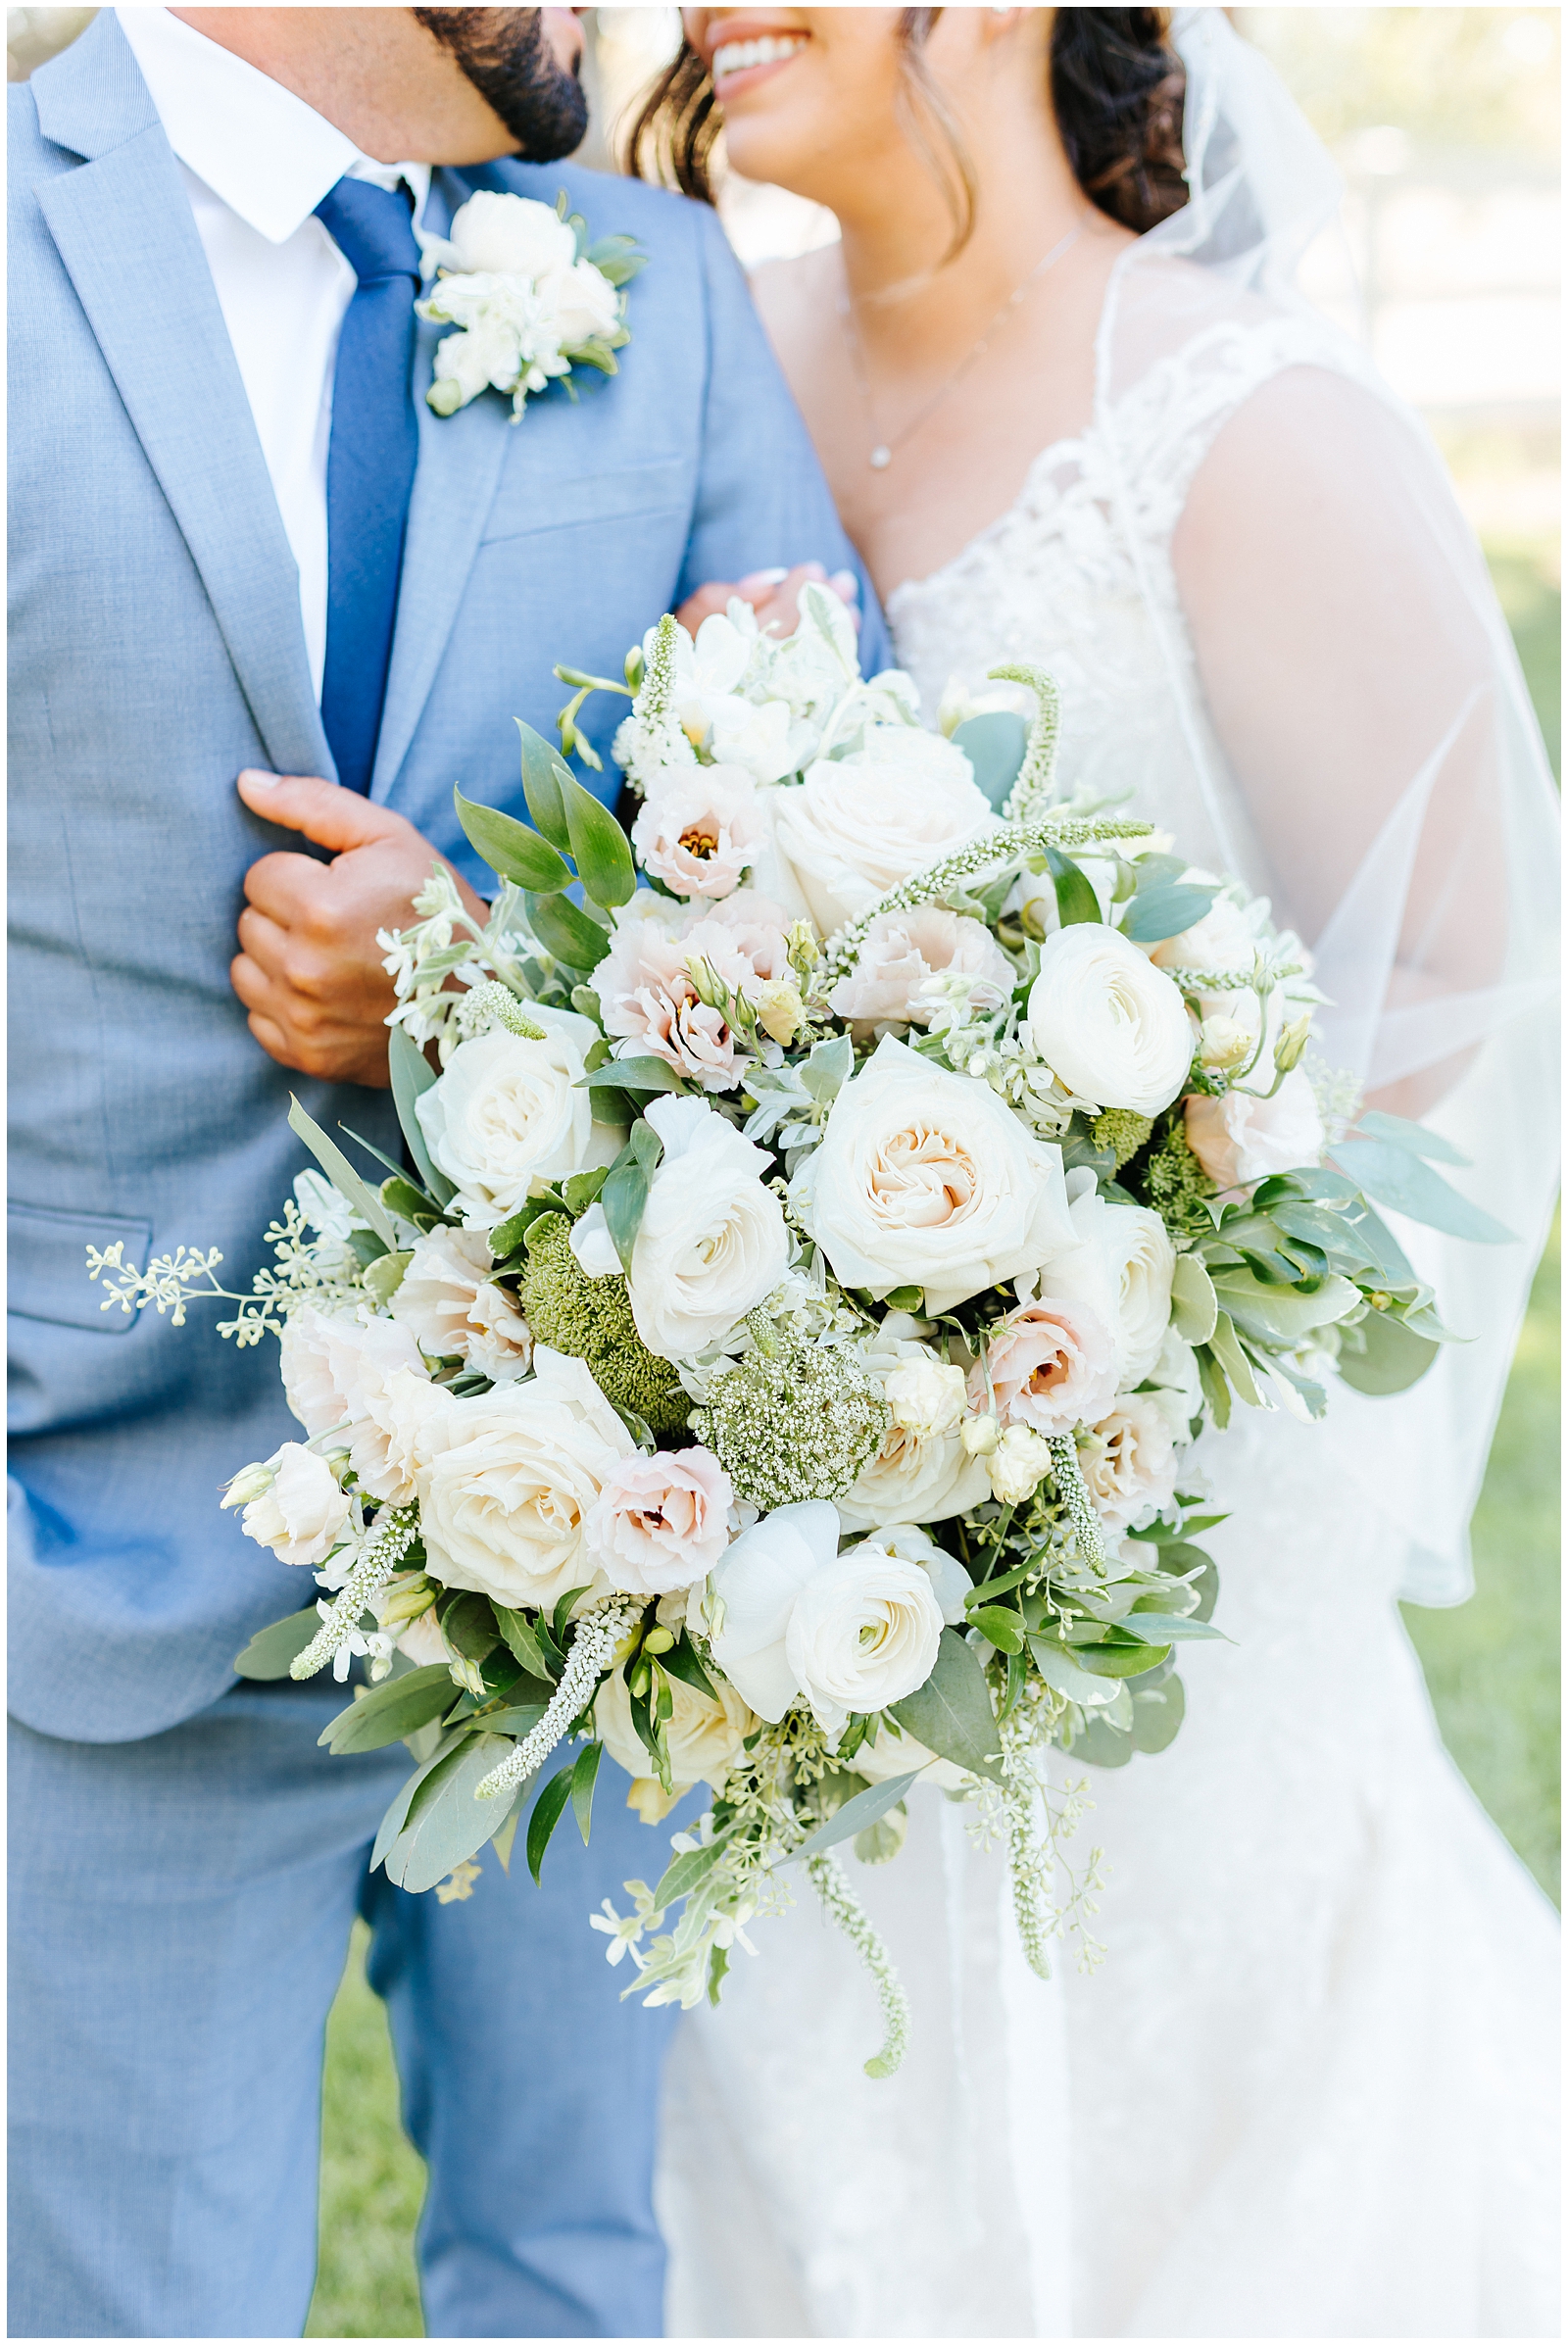 White, cream, and blush rose Bridal Bouquet by Posies Floral Design